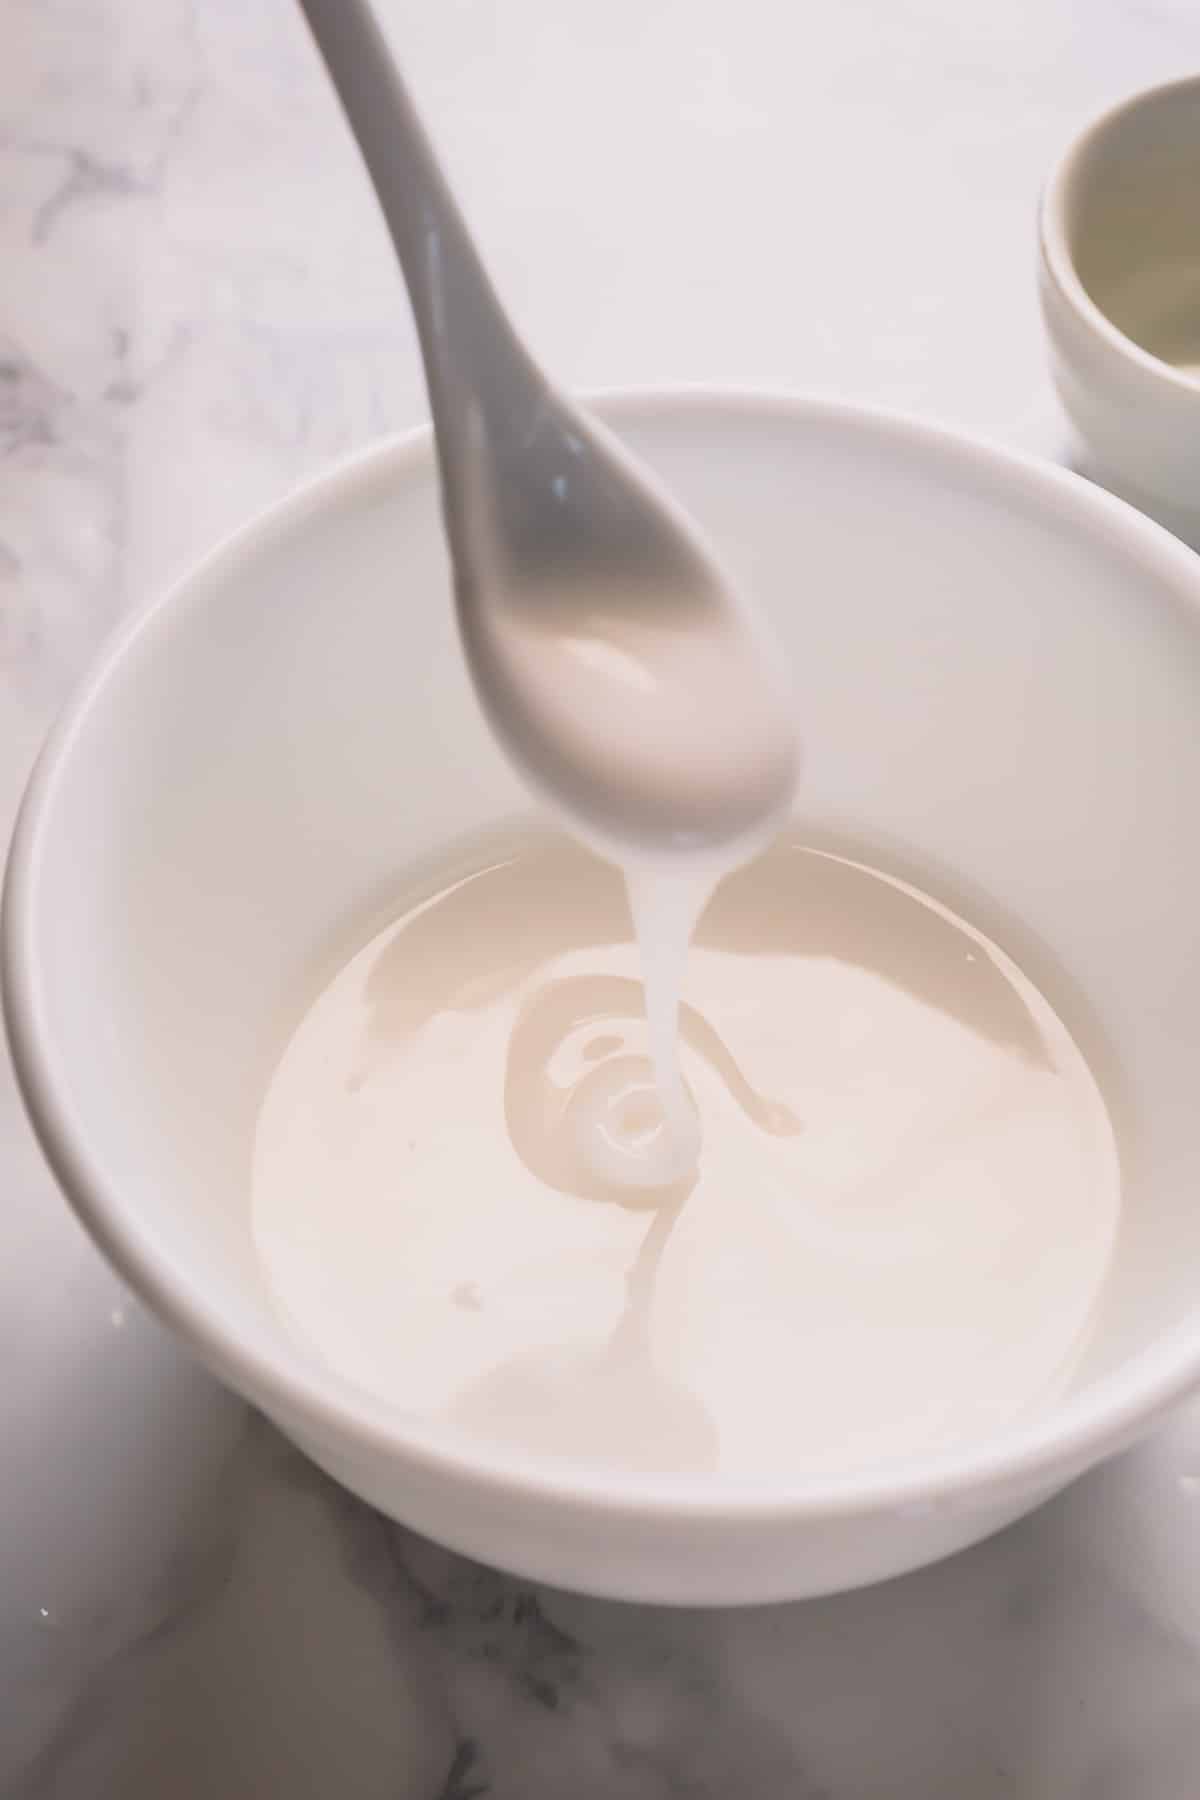 A white powdered sugar icing dripping from a spoon into a bowl of icing.